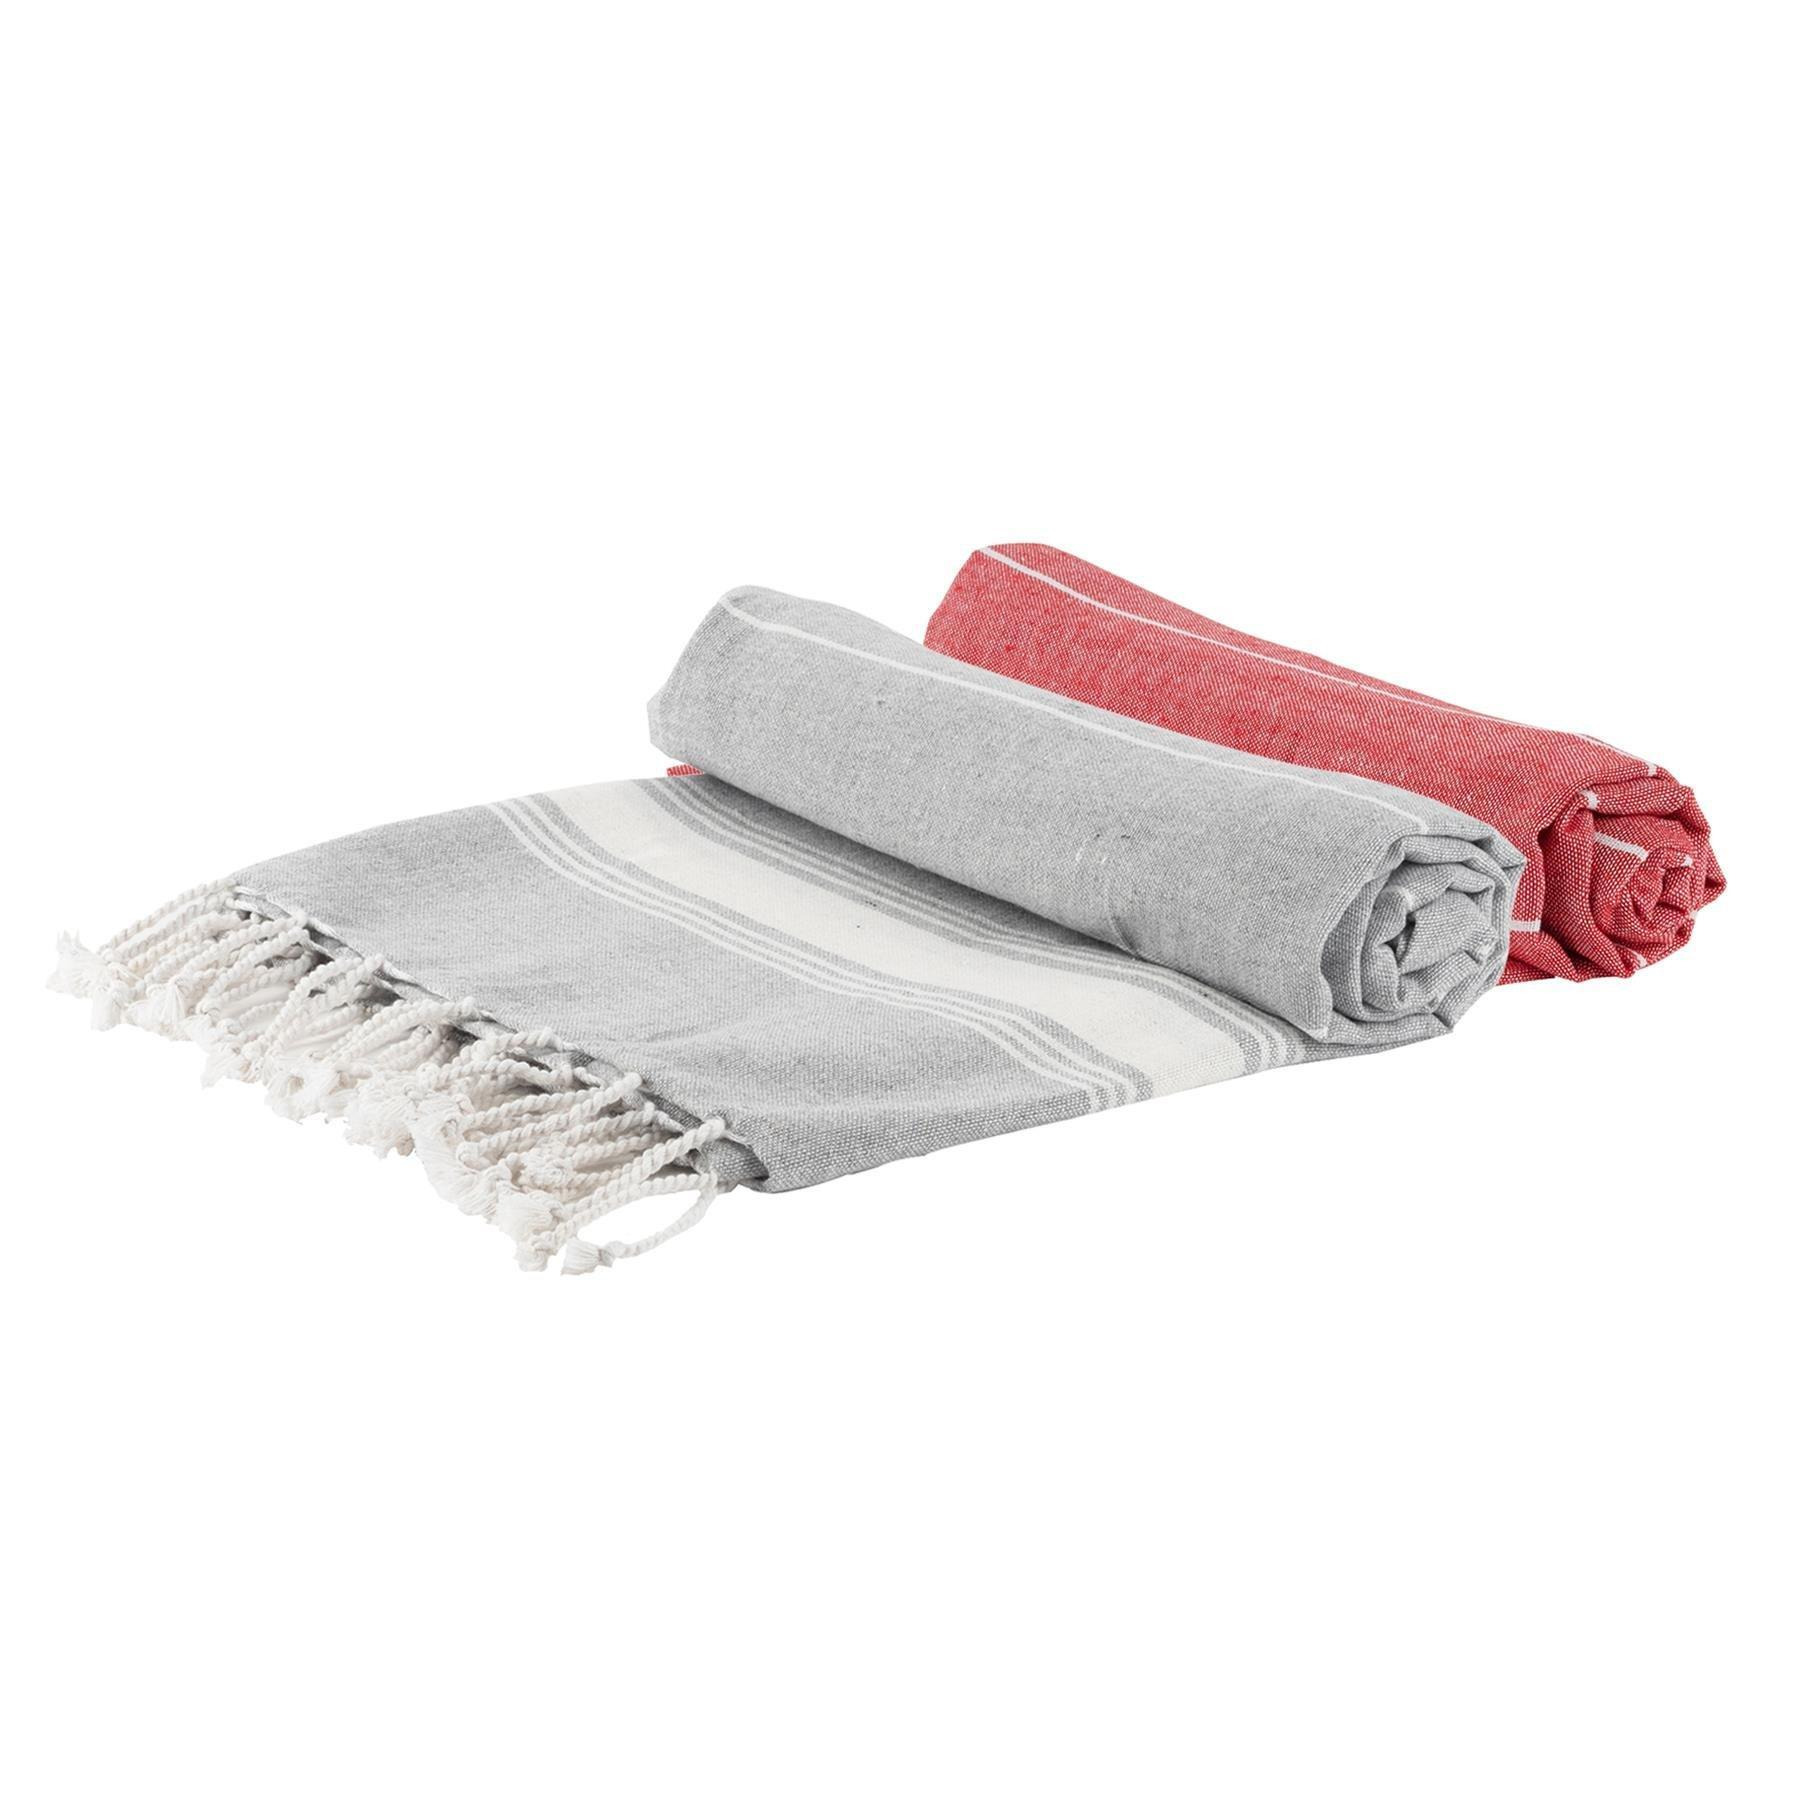 Turkish Cotton Bath Towels 170 x 90cm Grey/Red Pack of 2 - image 1